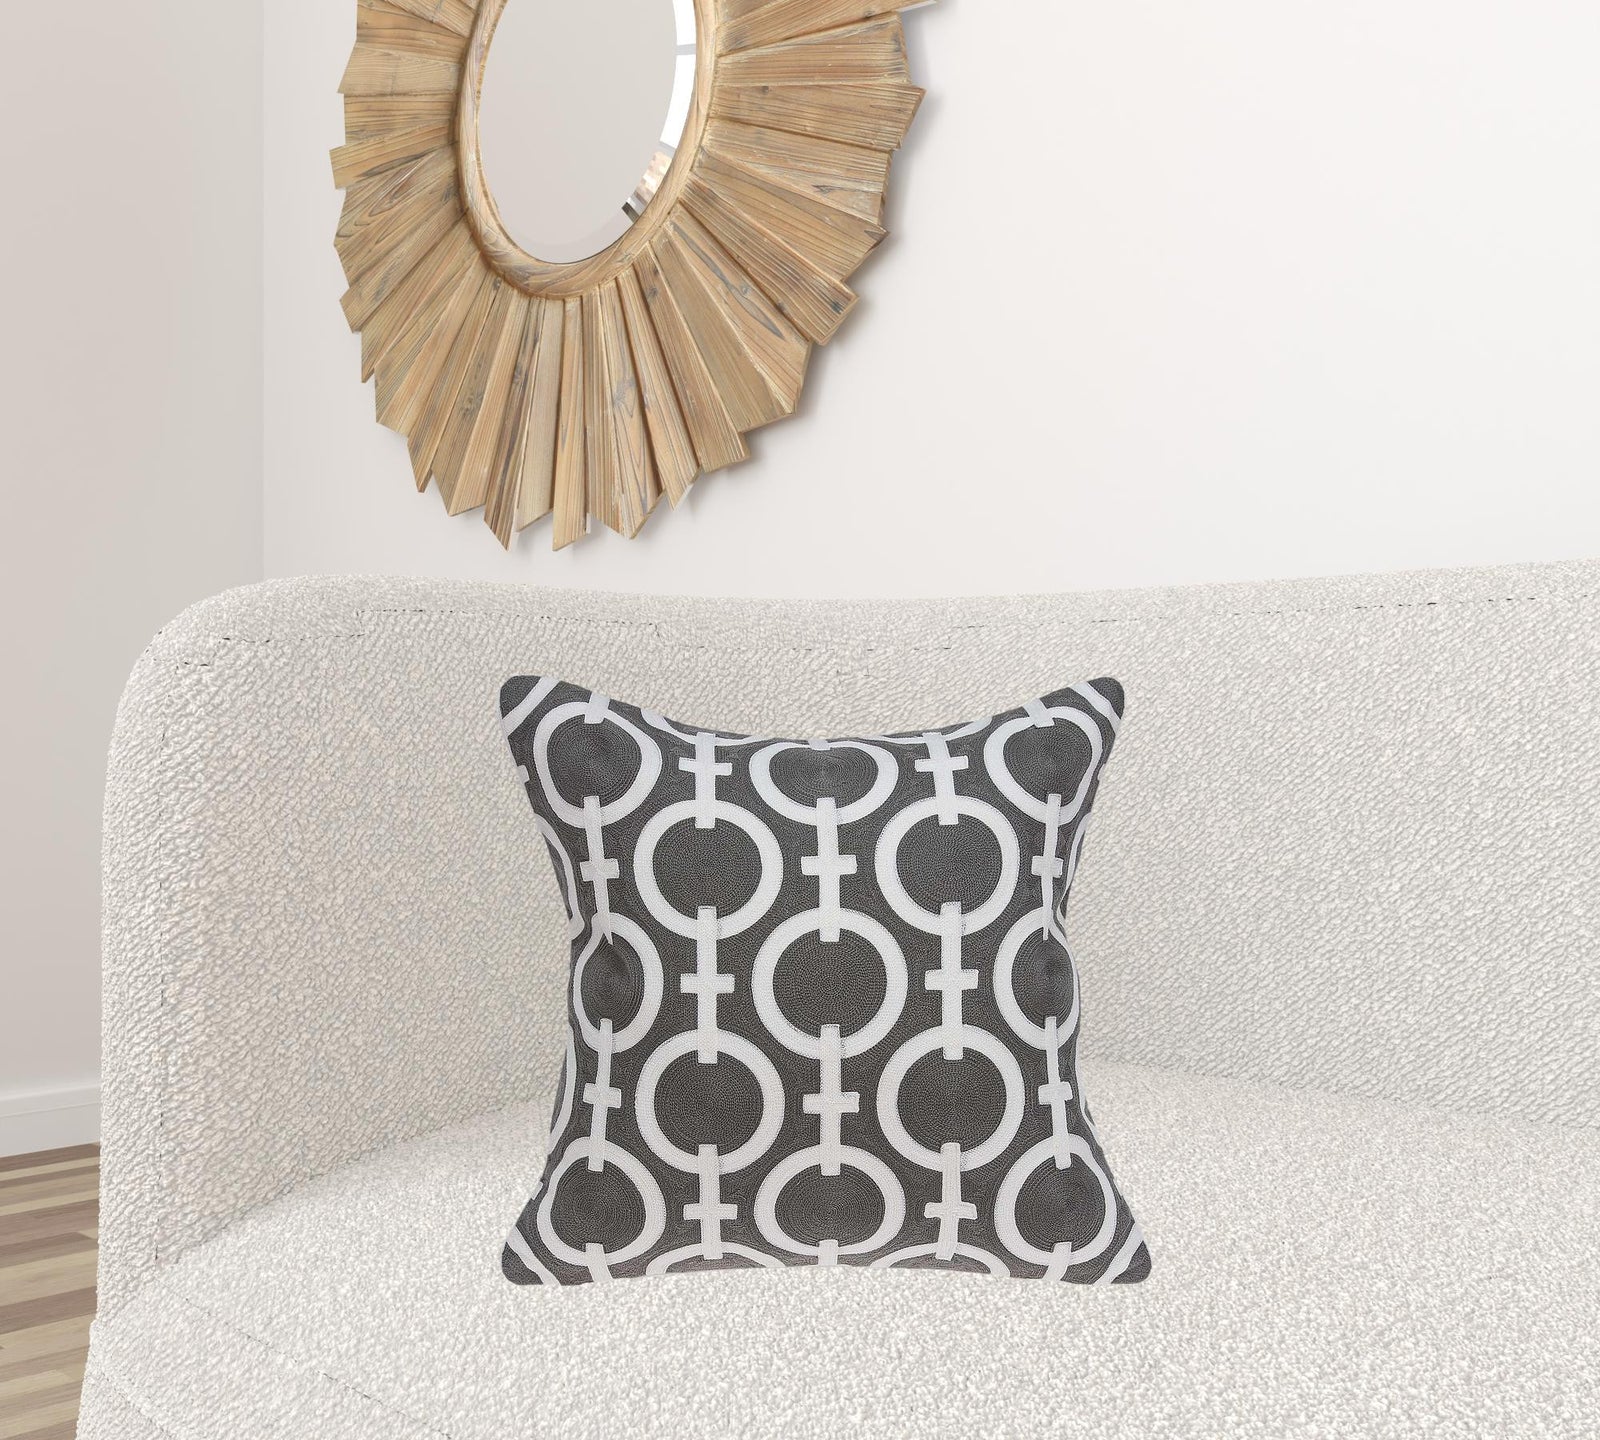 20" X 7" X 20" Transitional Gray And White Accent Pillow Cover With Down Insert